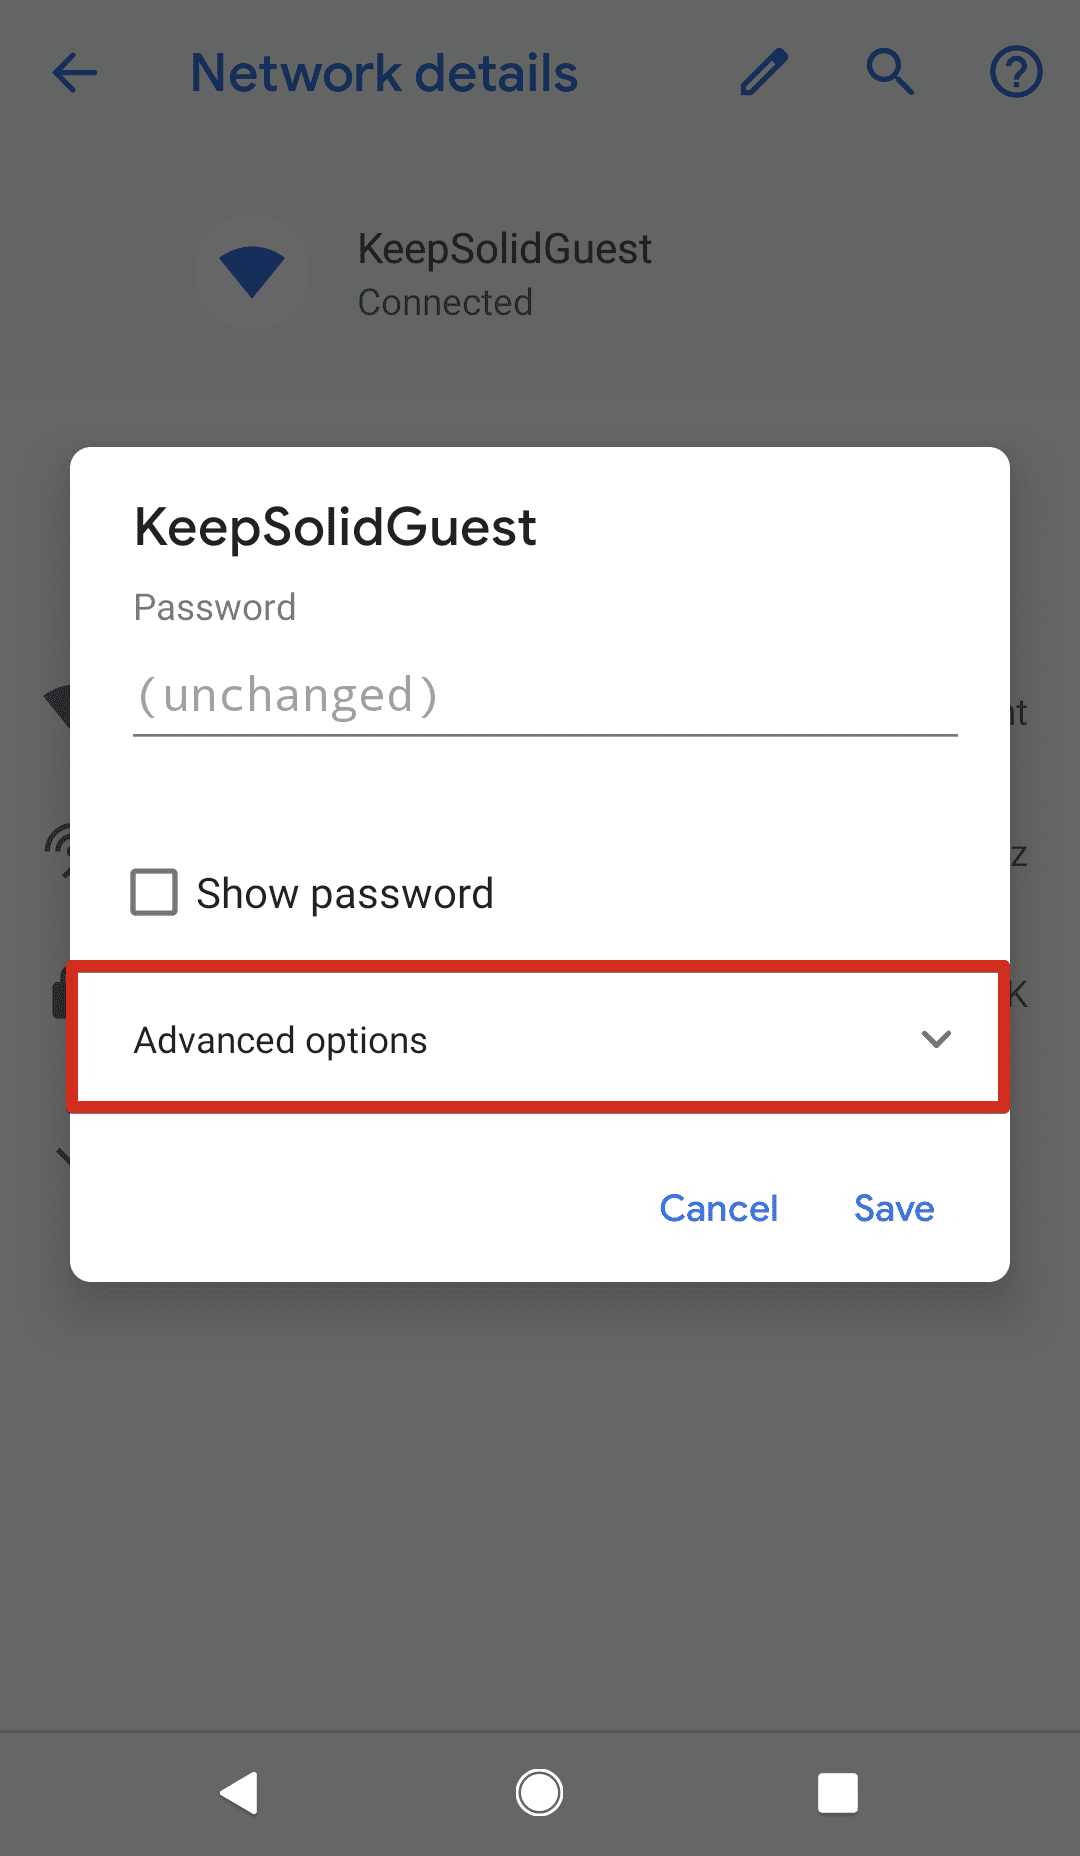  Change DNS on Android: edit network details > advanced options